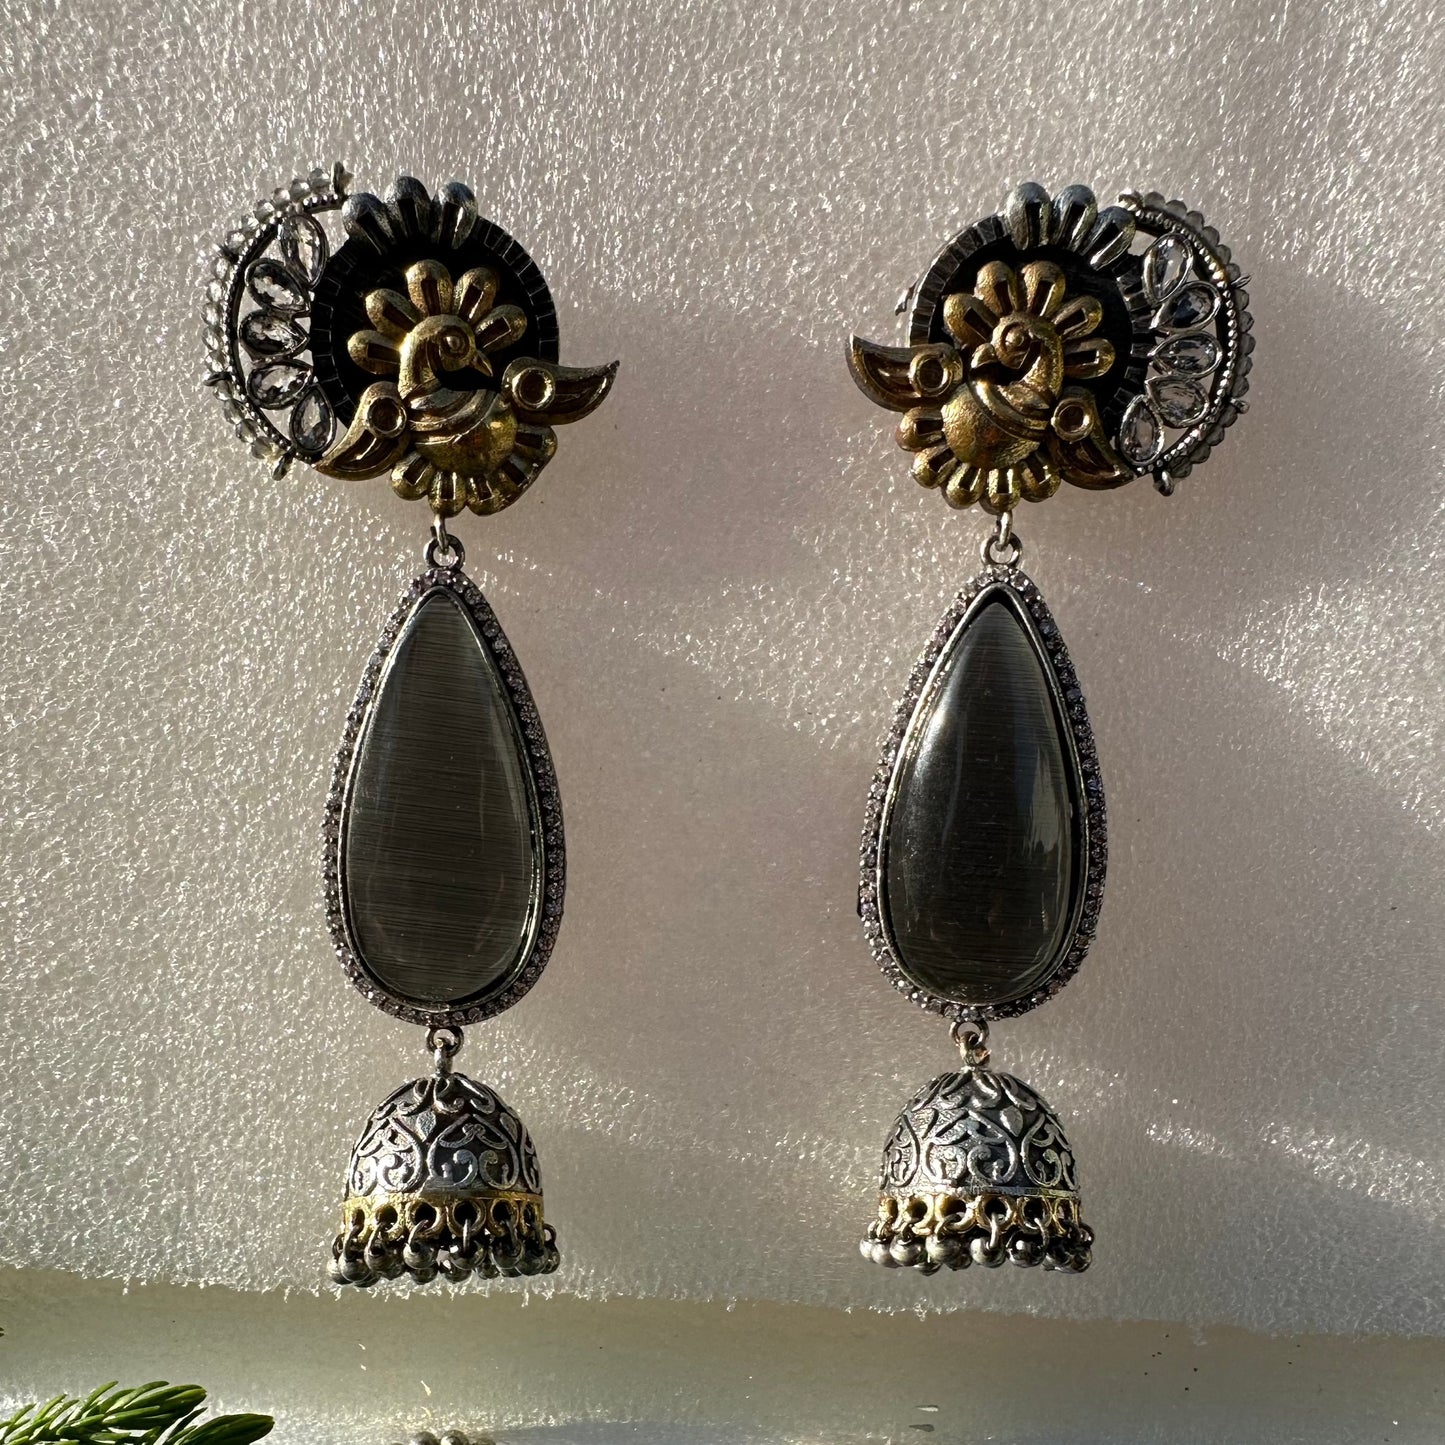 Unmatched Silver Grey Earrings